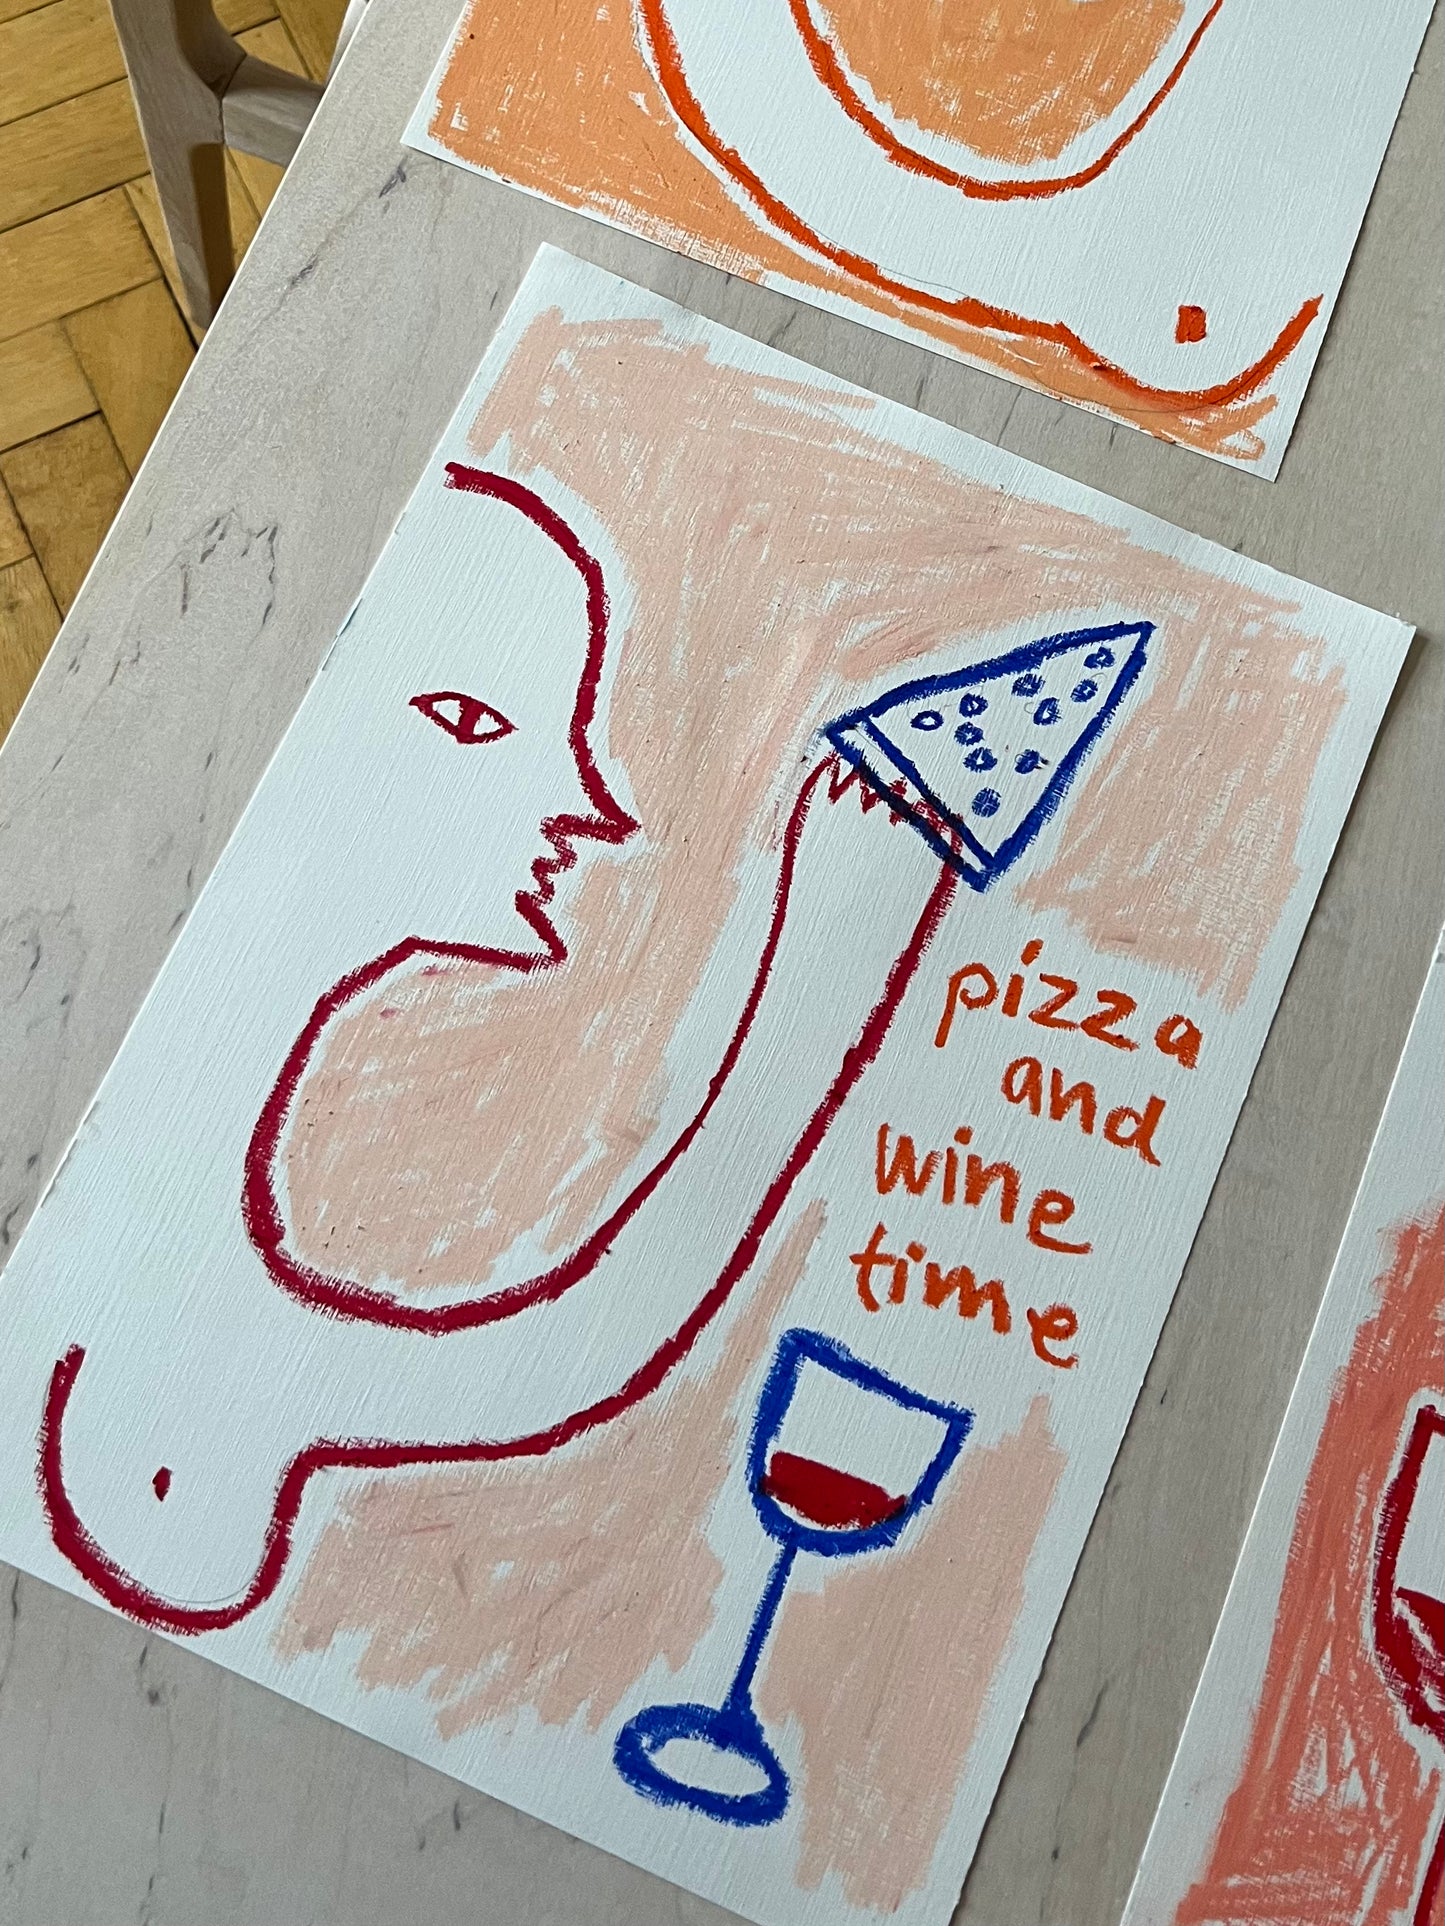 Pizza and wine time